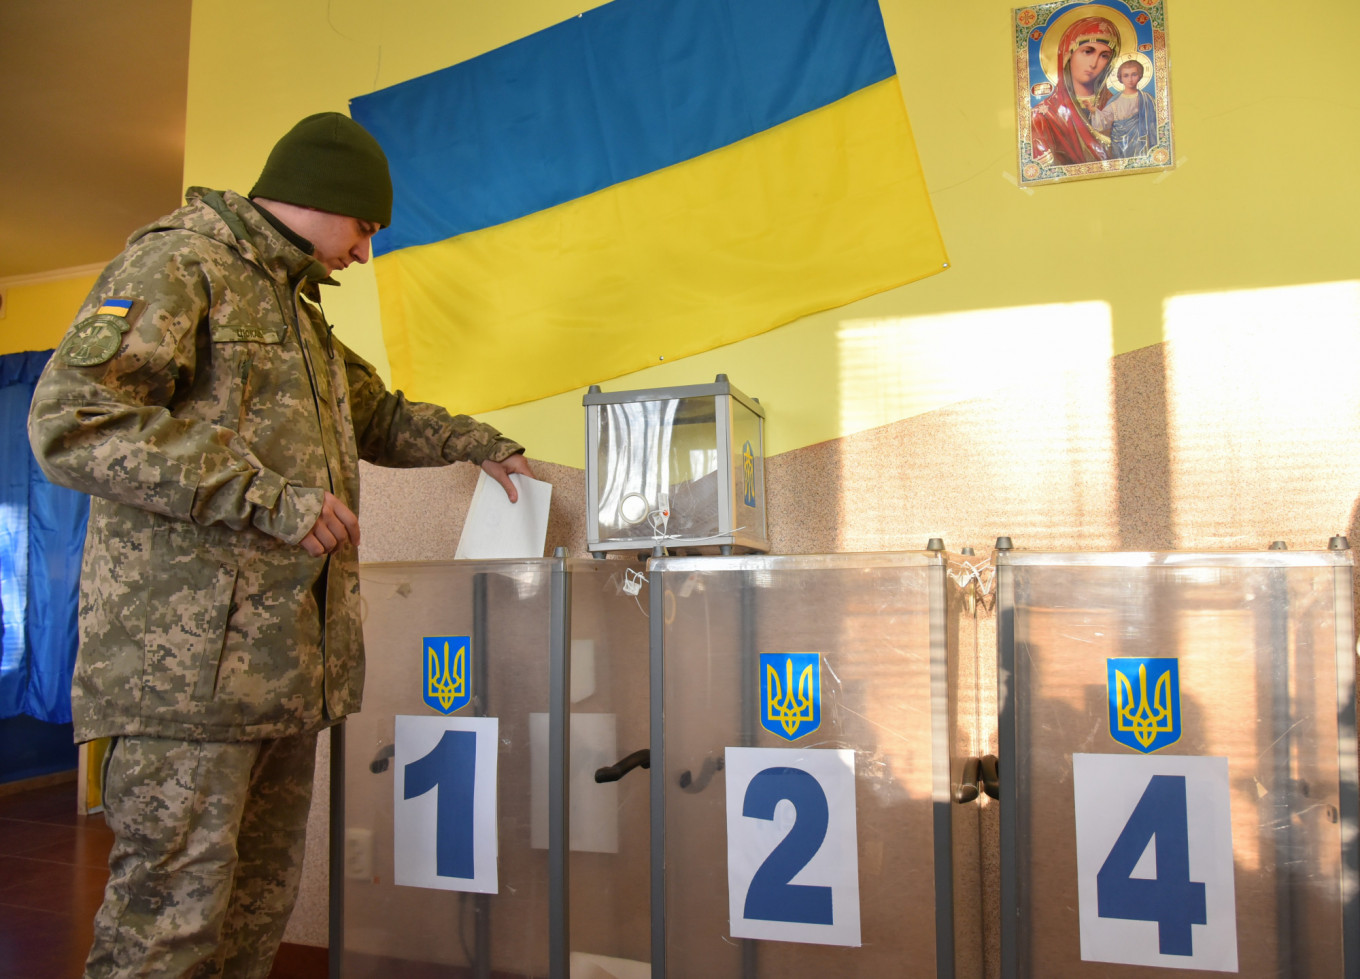 Poroshenko’s Politics Have ‘Failed,’ Russian Lawmakers Say After Ukraine Election Results